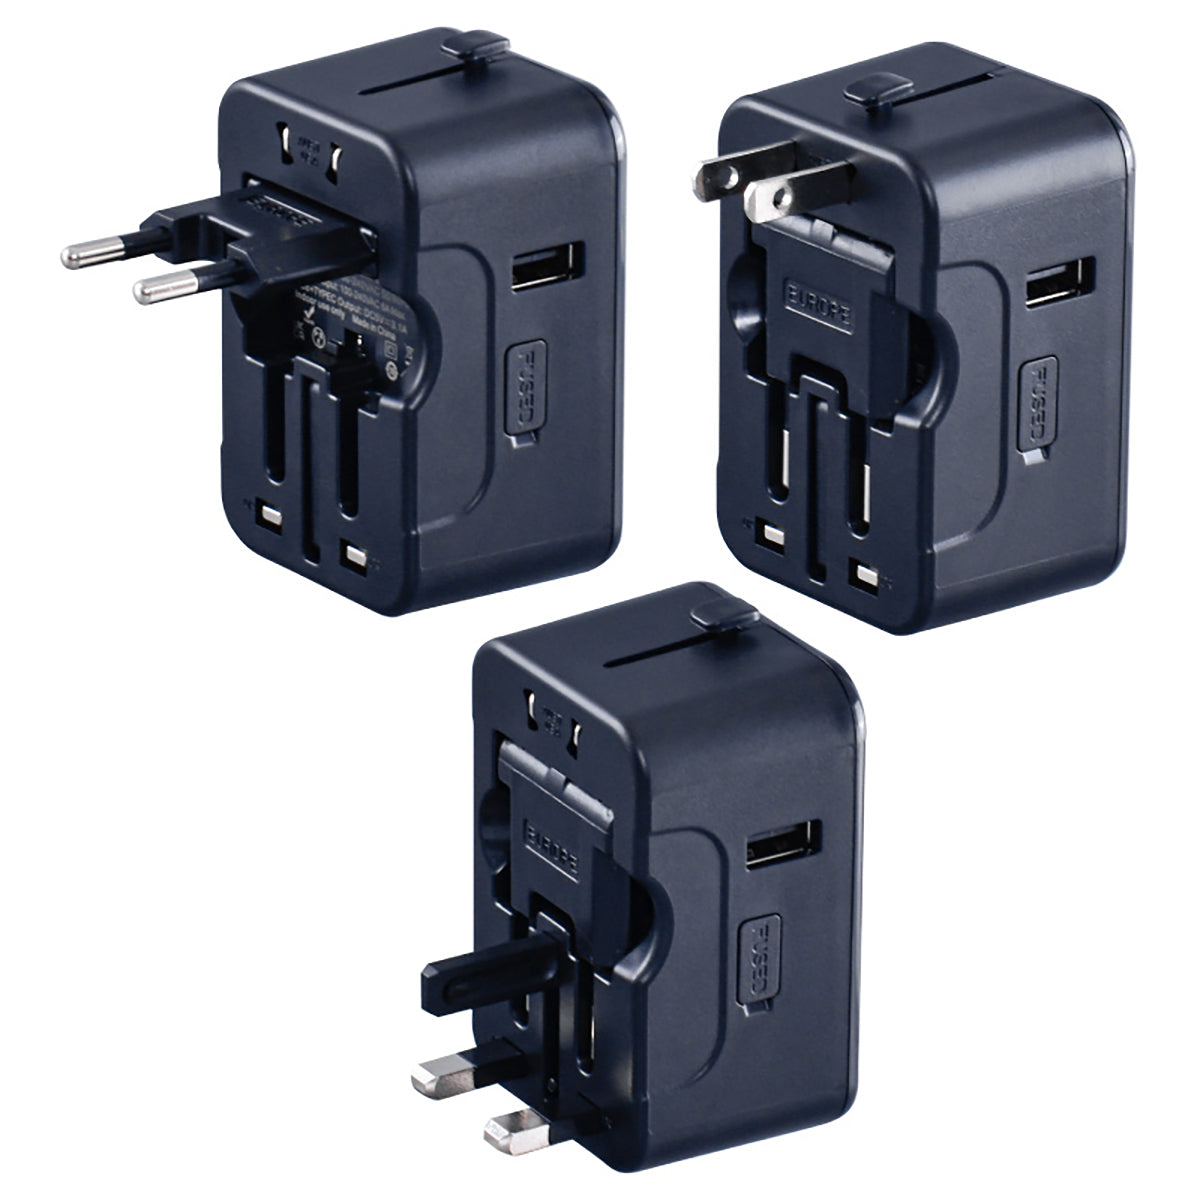 Multi Adapter | Travel Adapter With 1x USB + 2xType-C Charger | US UK EU AU Adapter (PP7970) White